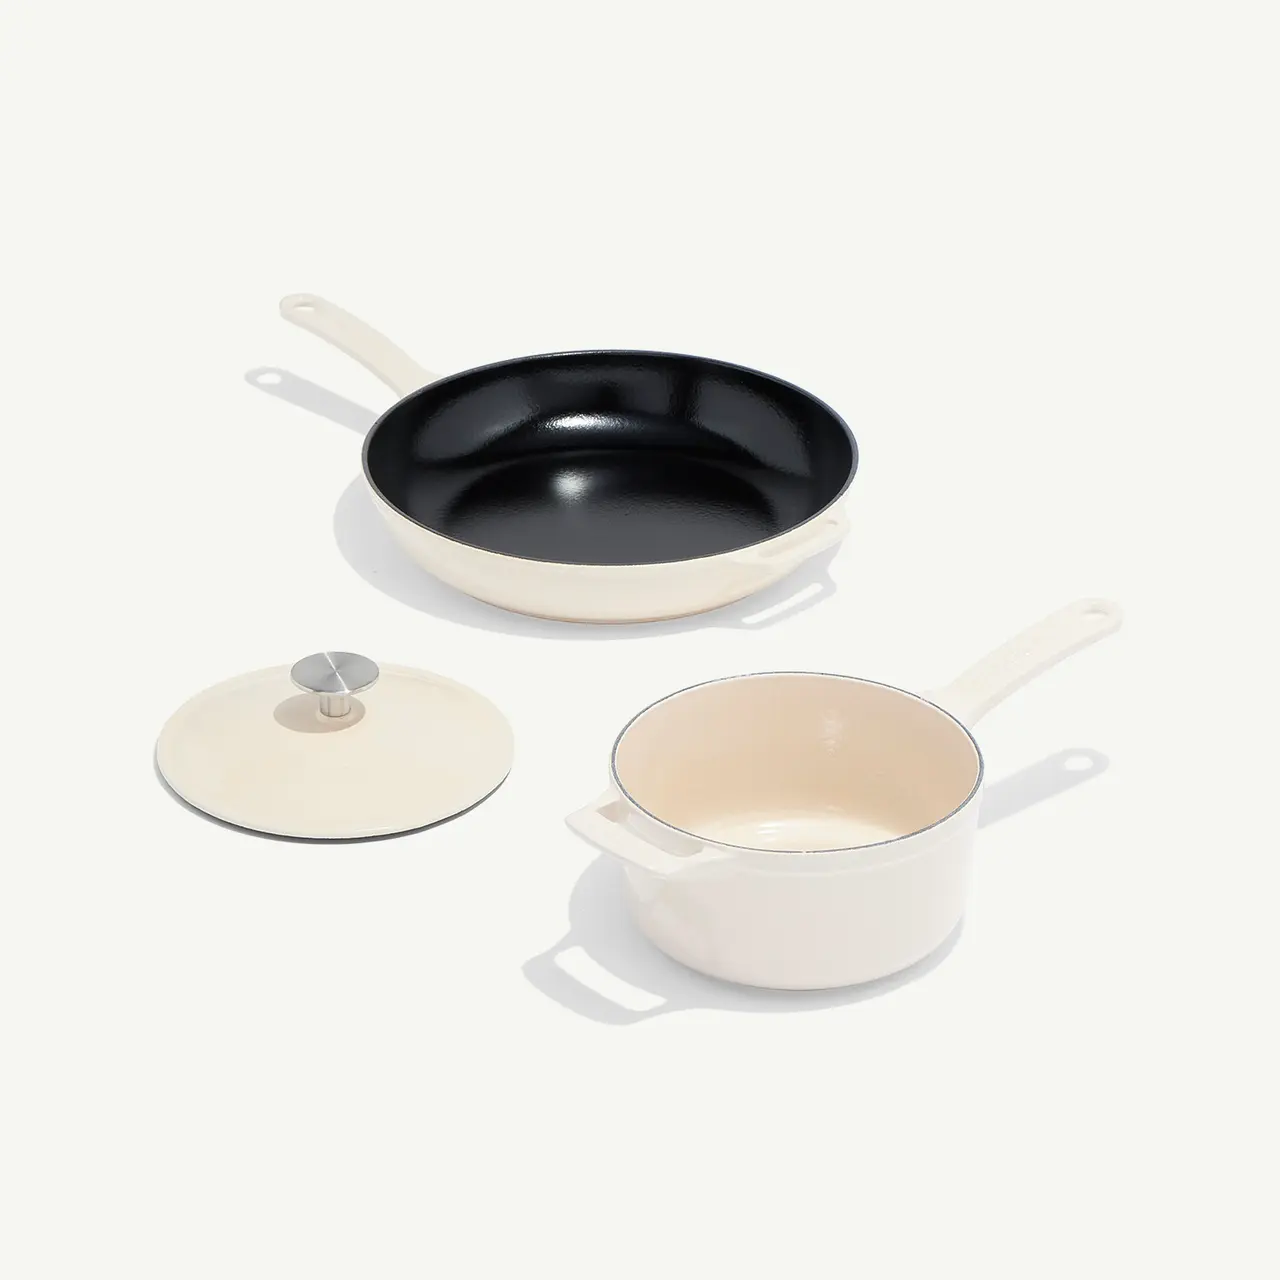 A black frying pan and a white saucepan with a matching lid are arranged neatly on a white background.